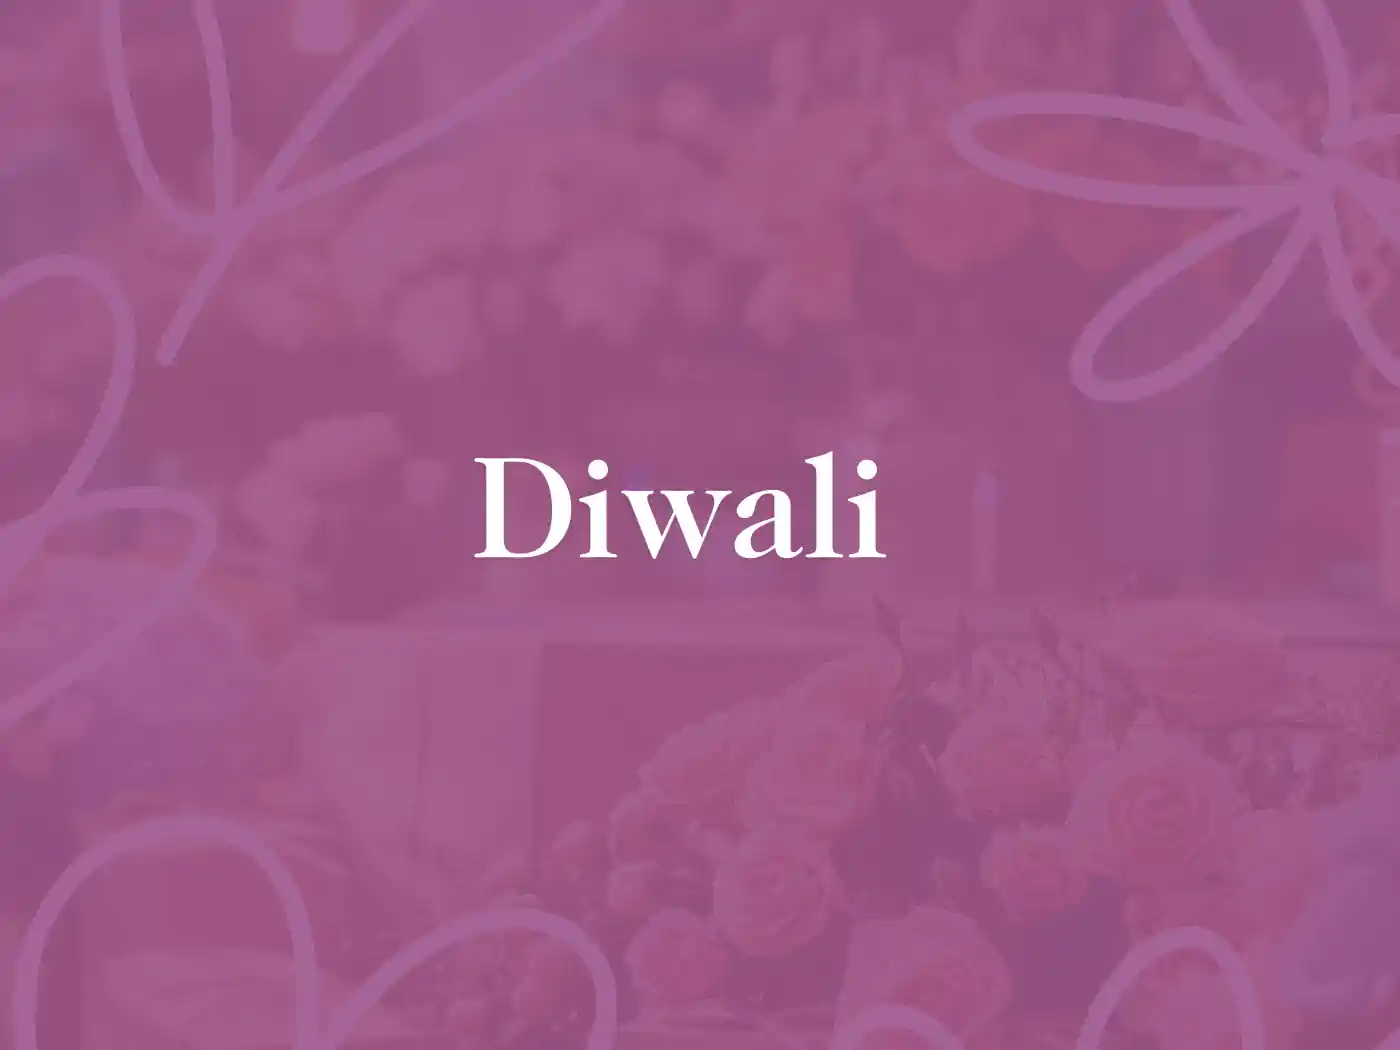 Purple featuring elegant floral patterns and the word 'Diwali' prominently displayed, perfect for festive wishes. Diwali. Delivered with Heart by Fabulous Flowers and Gifts for Diwali celebrated."